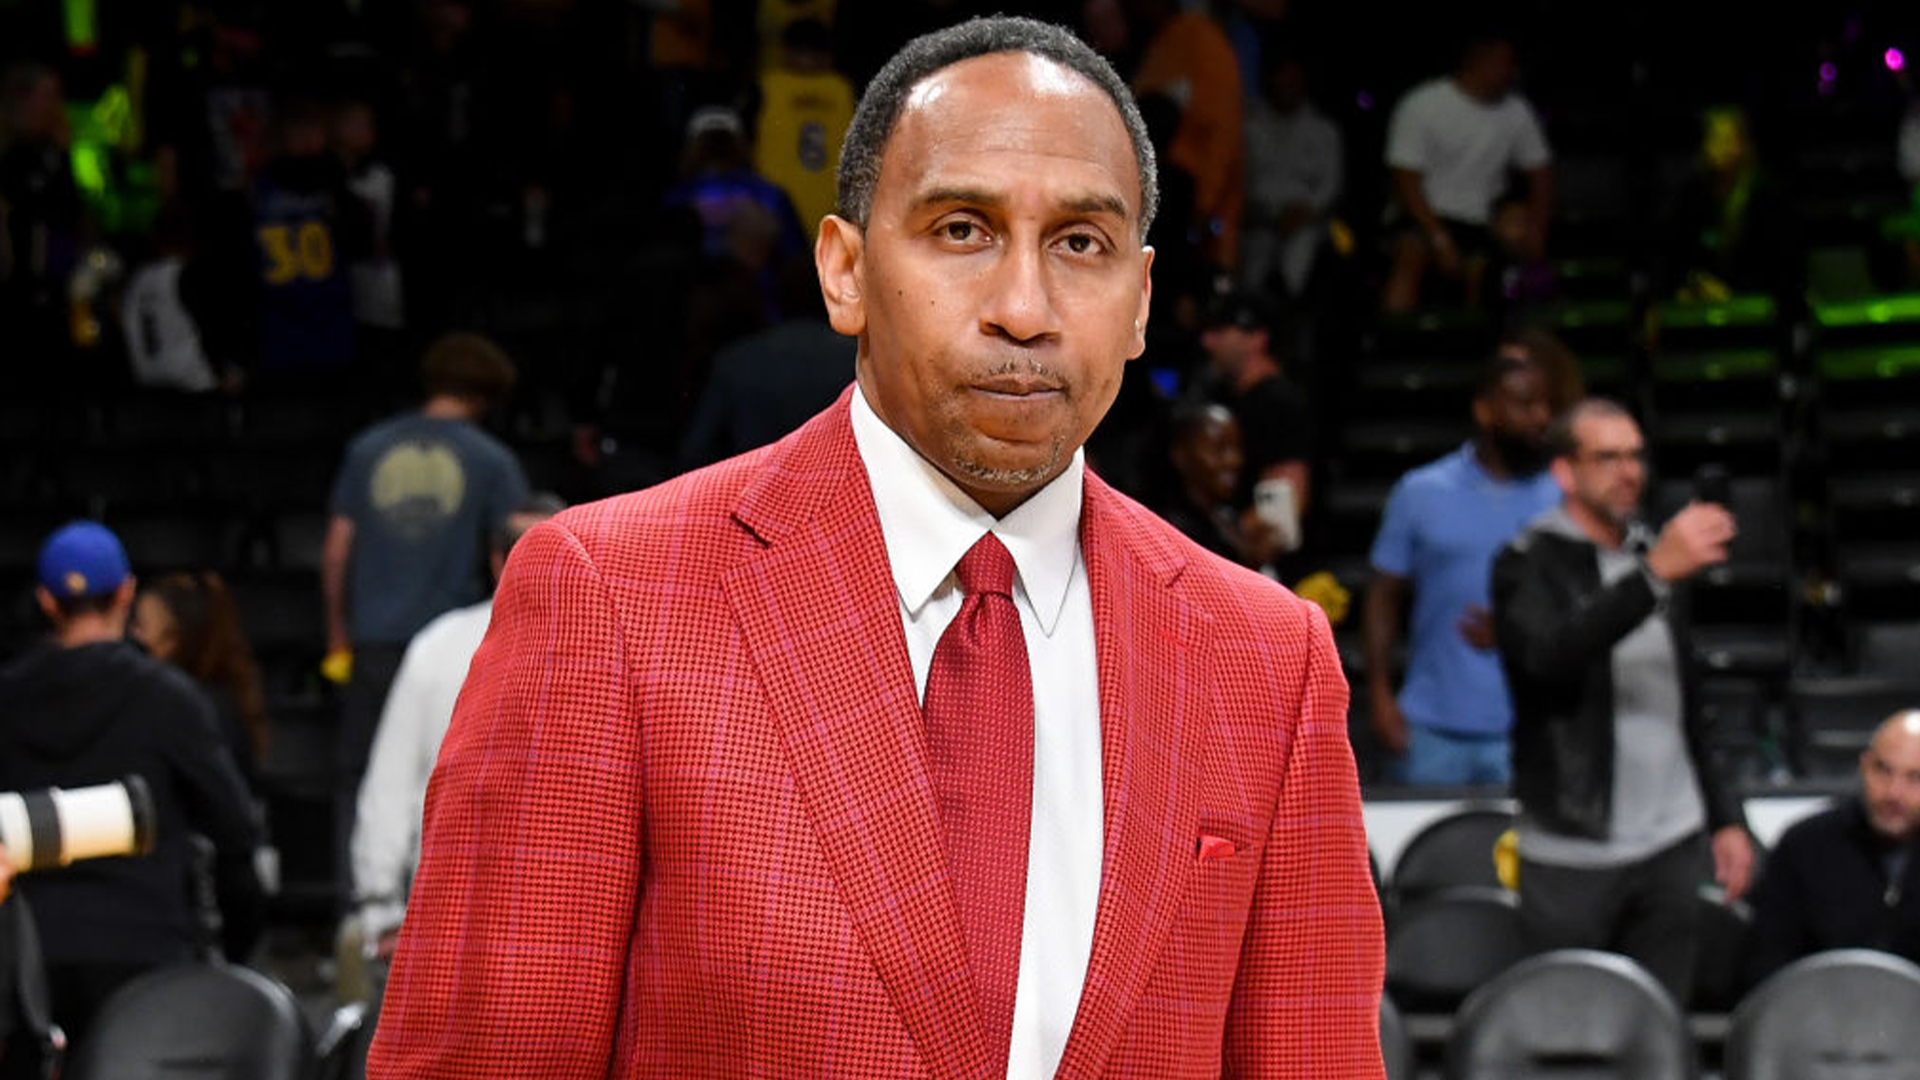 Stephen A. Smith Recalls A Move He Made In His Career That Caused ESPN To Offer Him $600K Less Than An Initial Contract